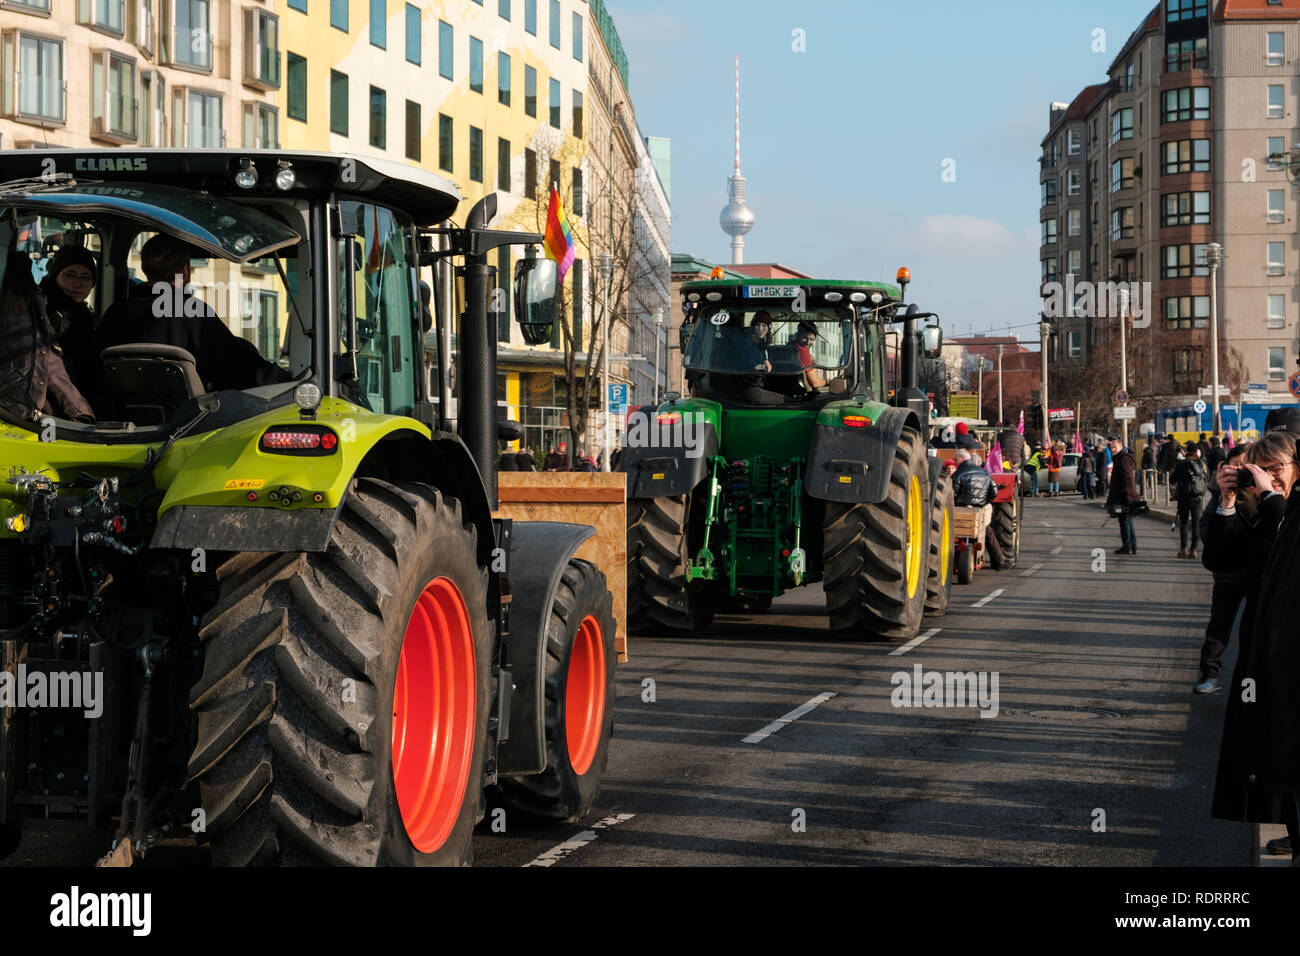 Berlin, Germany - January 19, 2019: Demonstration 'Wir haben es satt', against the german and EU agricultural policy and for sustainable agriculture in Berlin, Germany Credit: hanohiki/Alamy Live News Credit: hanohiki/Alamy Live News Stock Photo